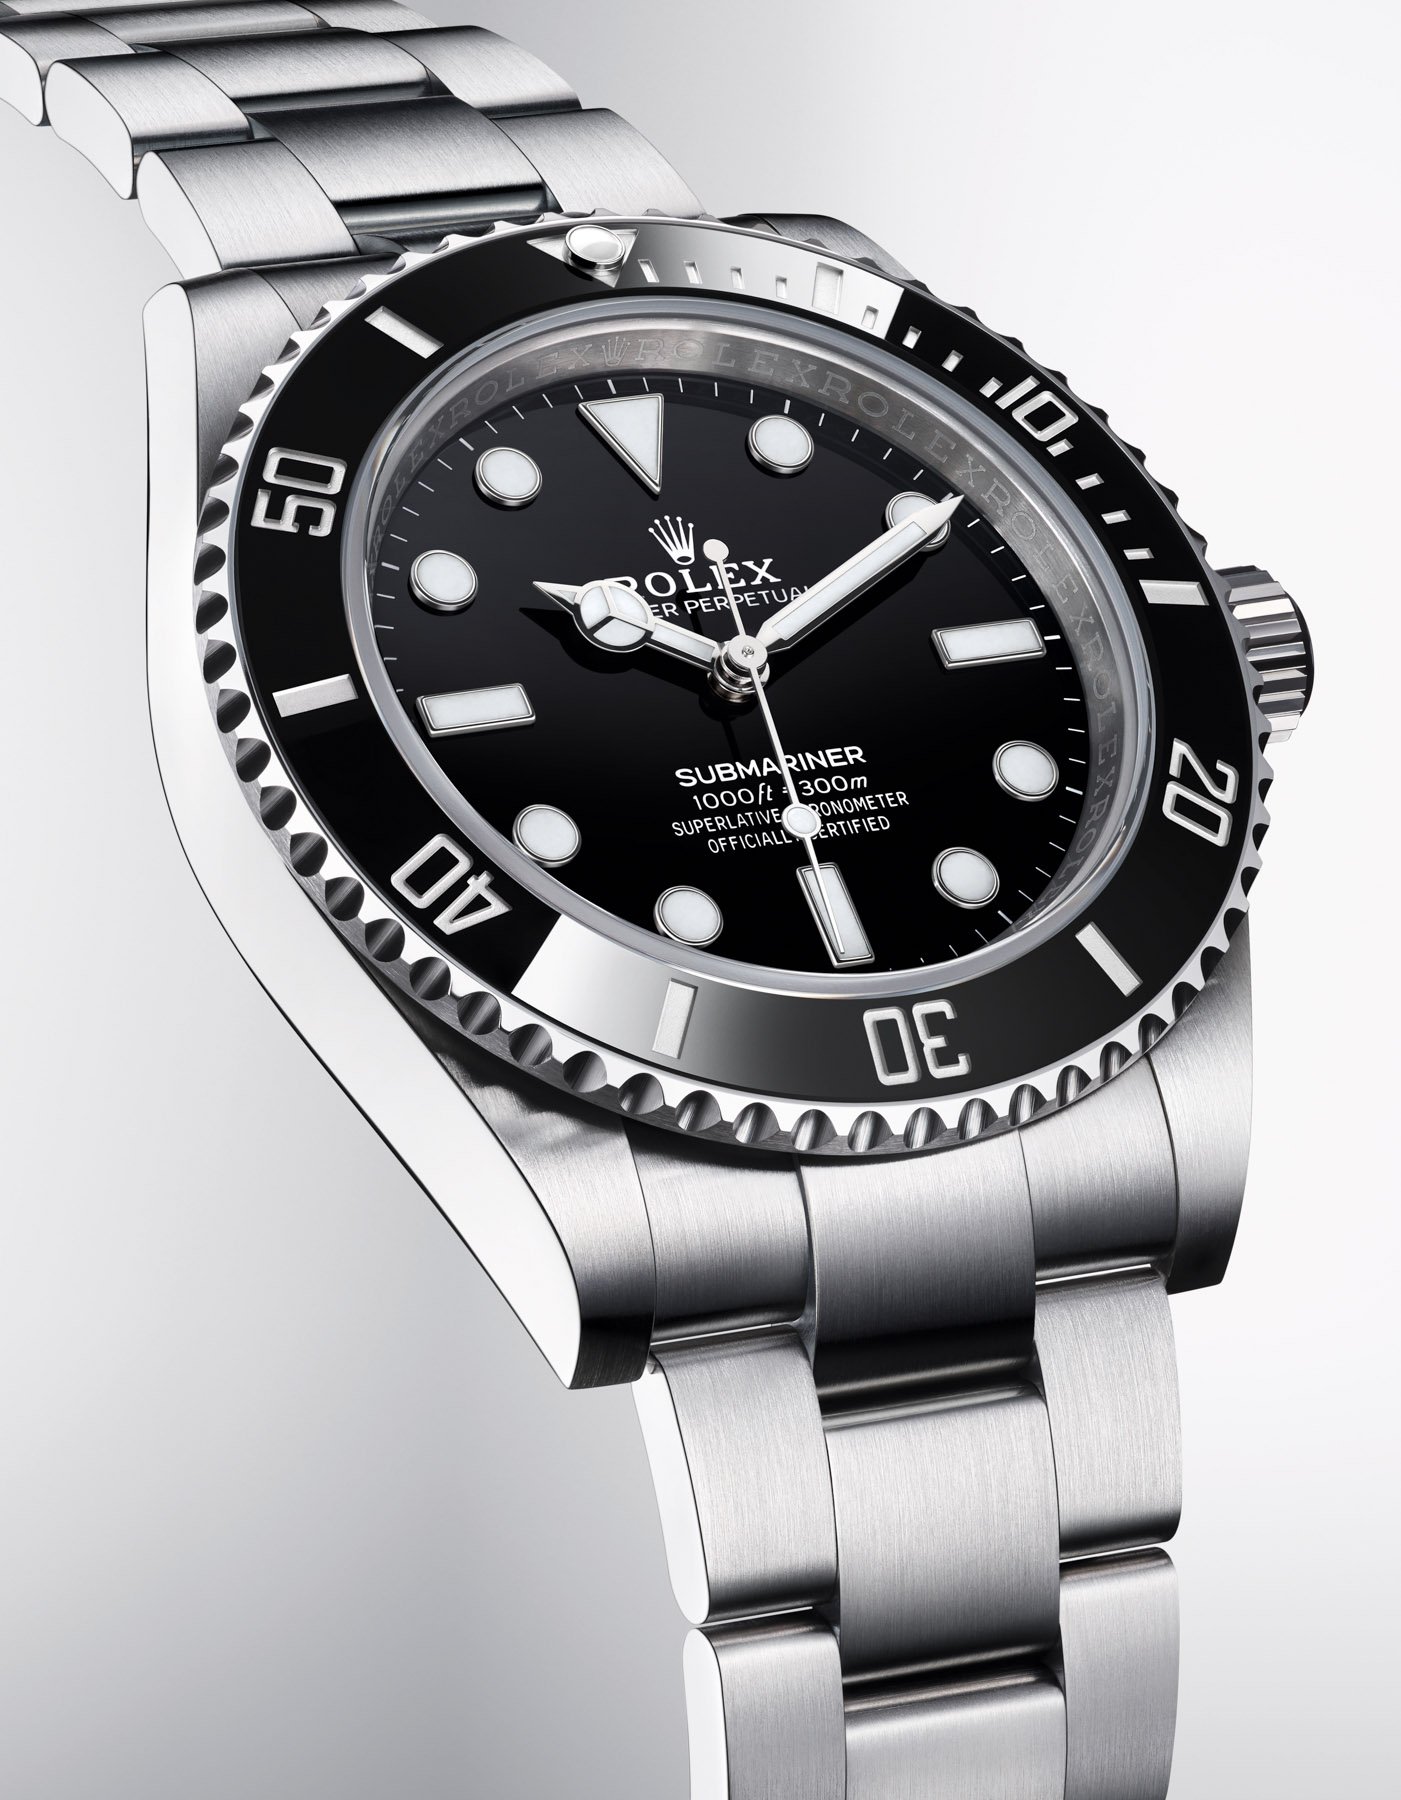 A New Shade of Green for the 126610LV Sub Bezel? - Rolex Forums - Rolex  Watch Forum